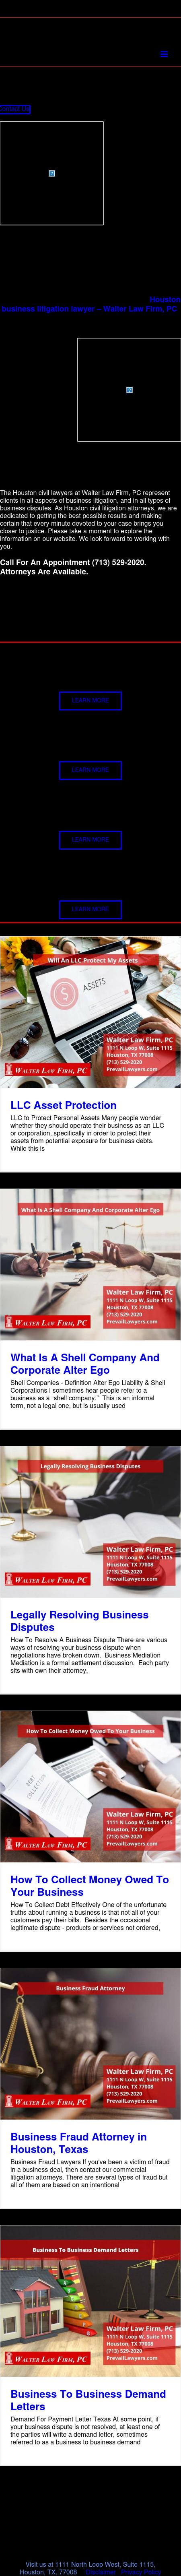 Walter Law Firm, PC - Houston TX Lawyers